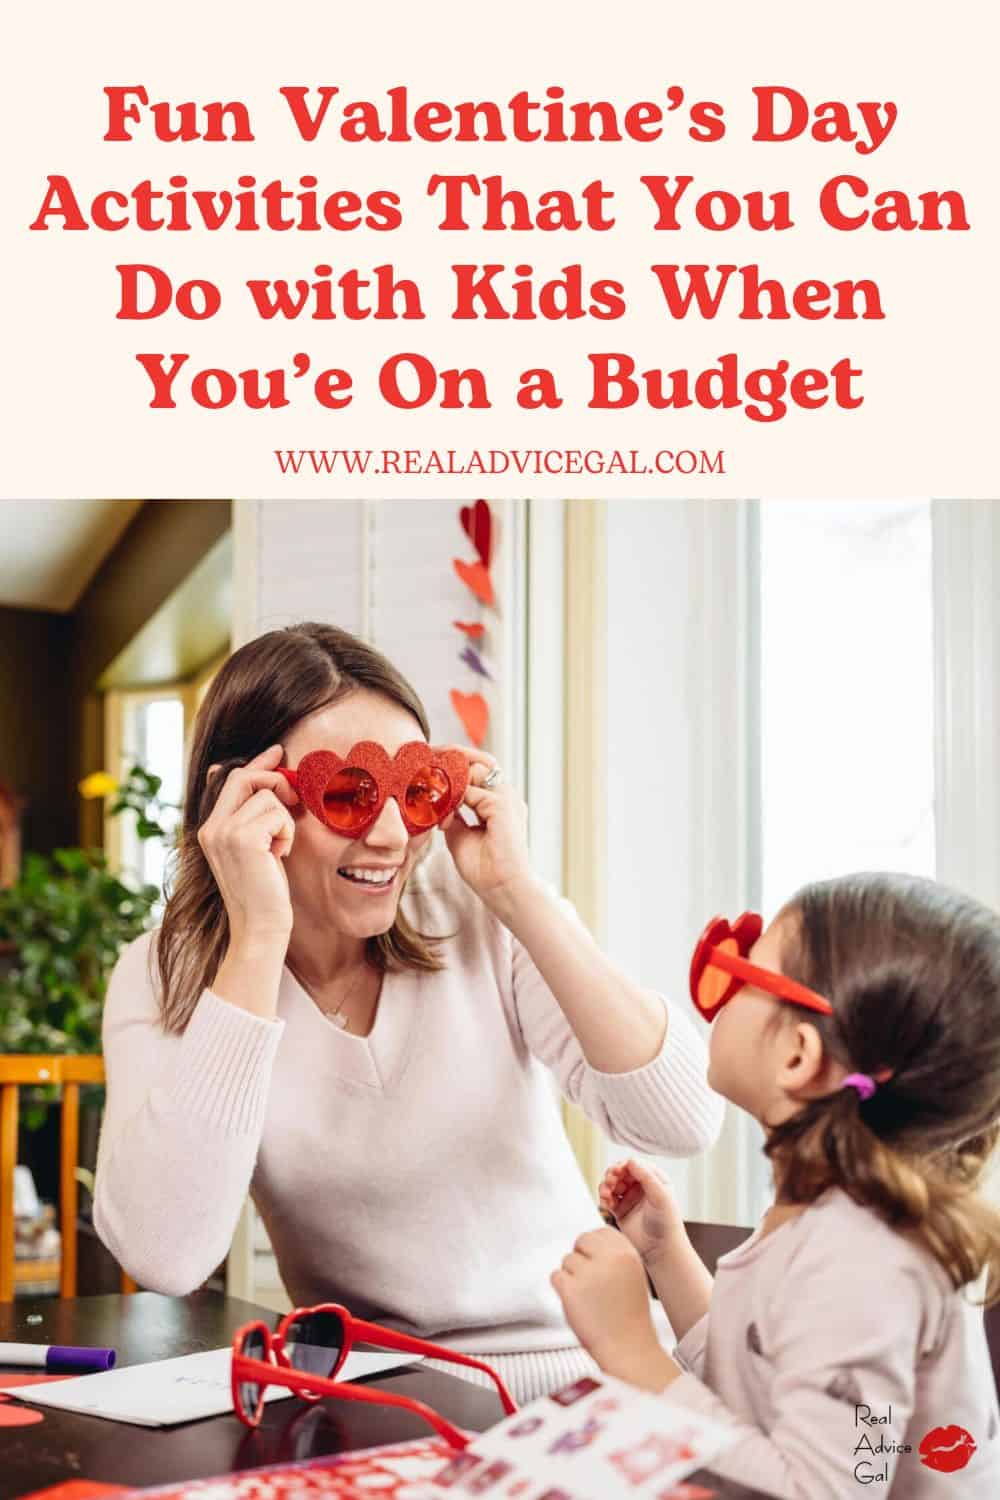 Fun Things To Do with Kids on Valentines Day When You're on a Budget